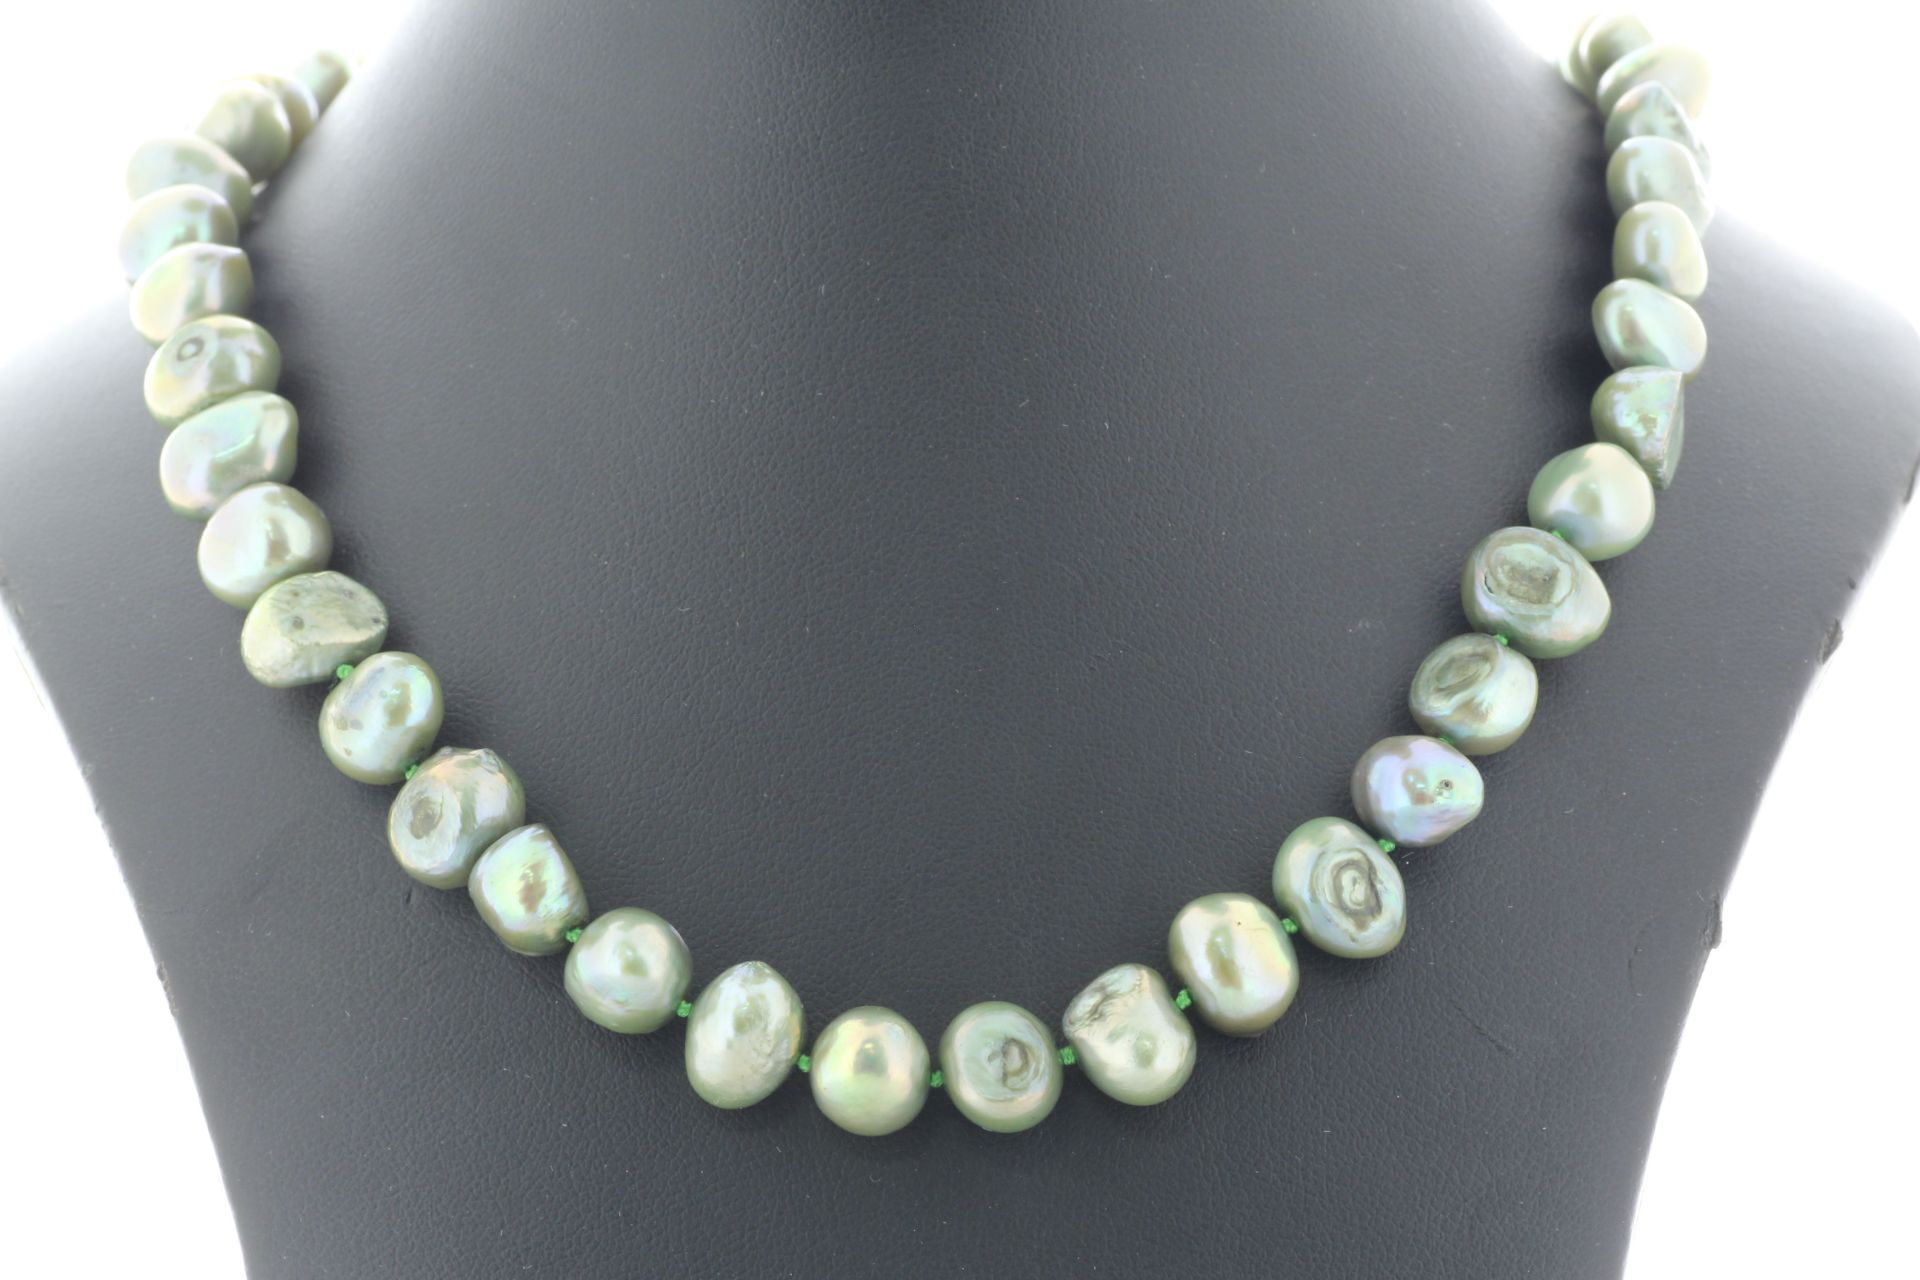 36 Inch Freshwater Baroque Shaped Cultured 8.0 - 8.5mm Pearl Necklace - Valued By AGI £360.00 - - Image 3 of 4